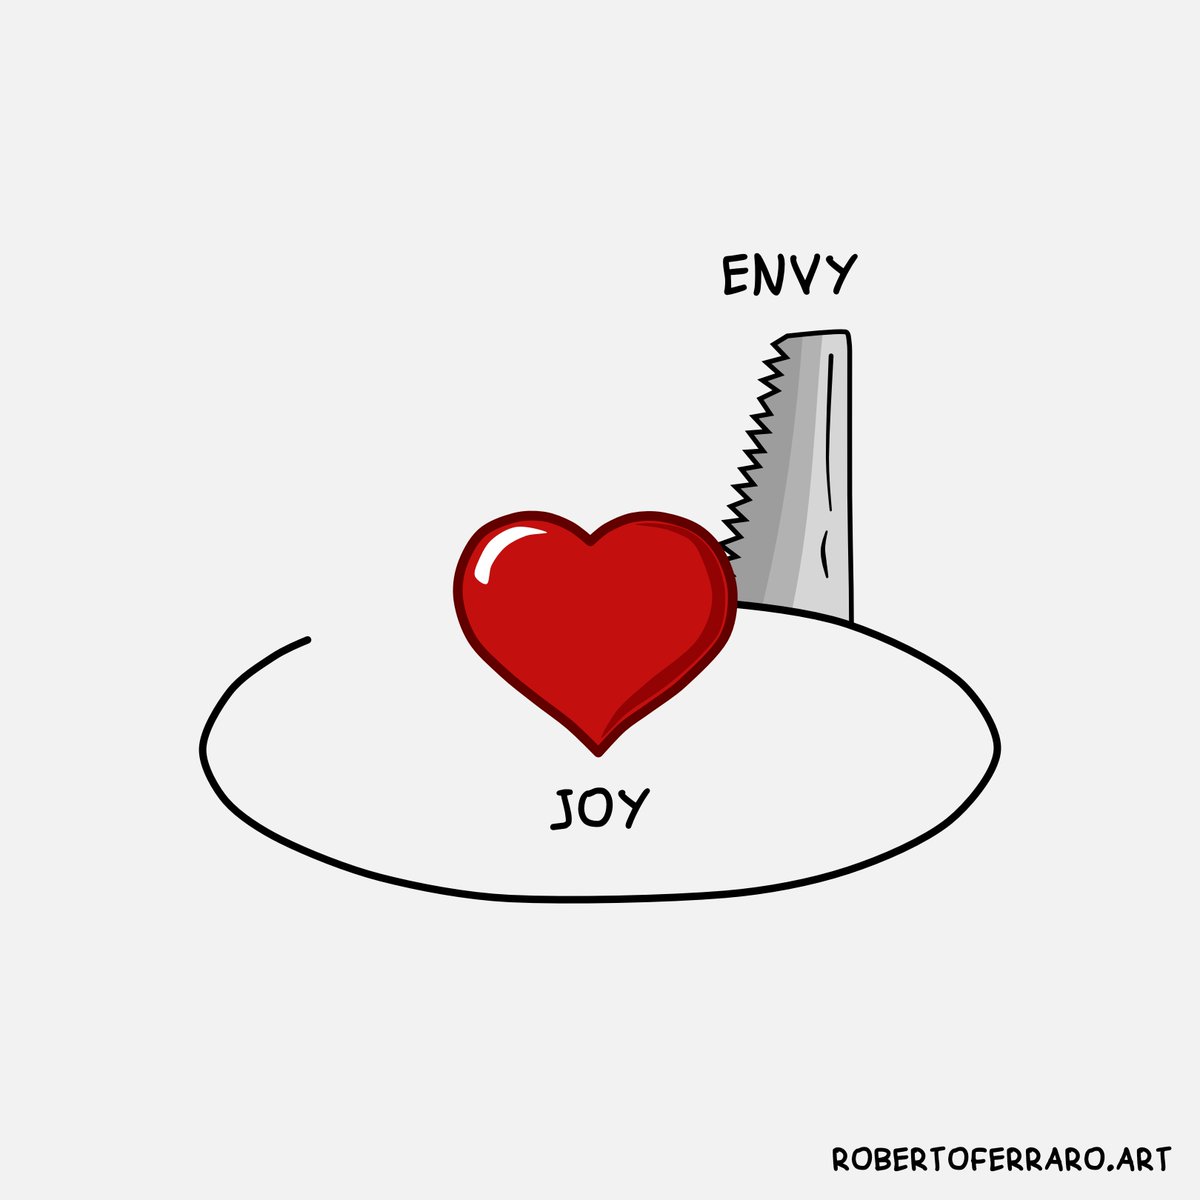 Envy is the thief of joy.